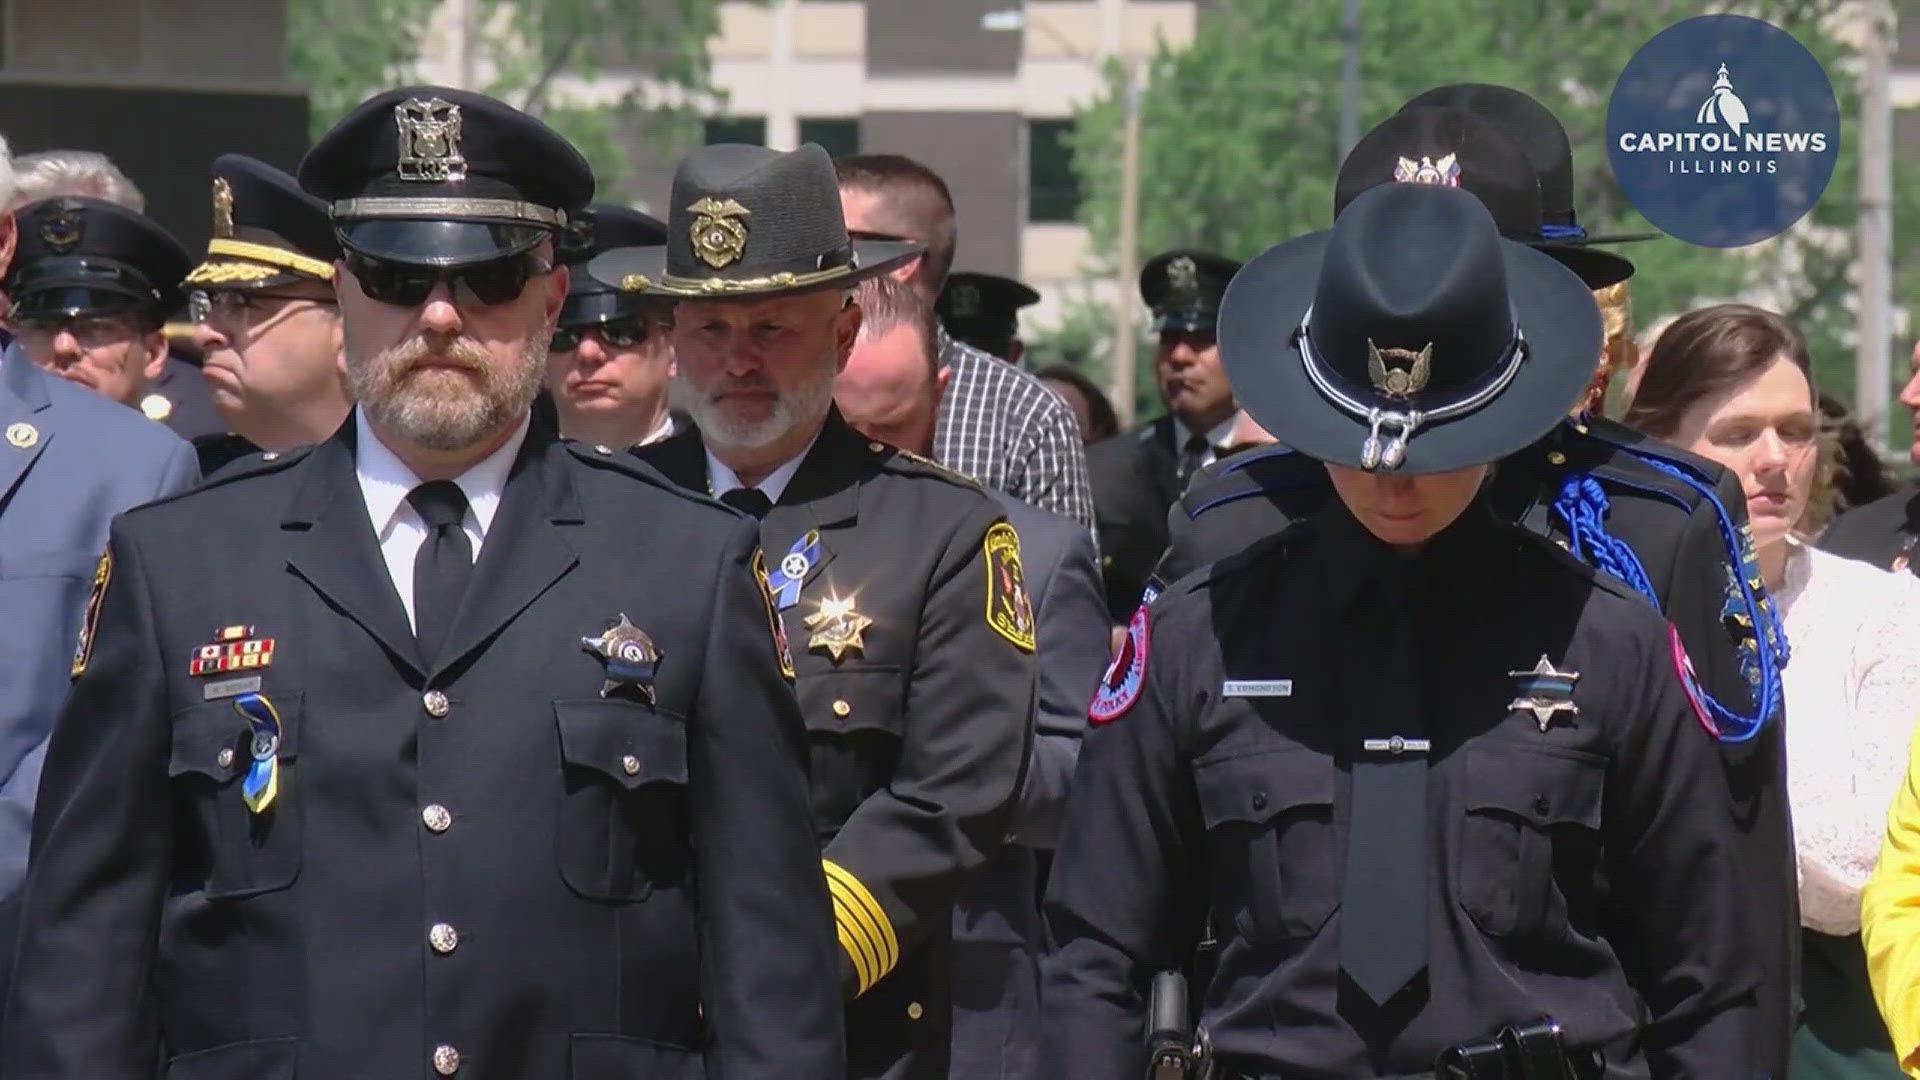 Six officers were memorialized at the annual ceremony.